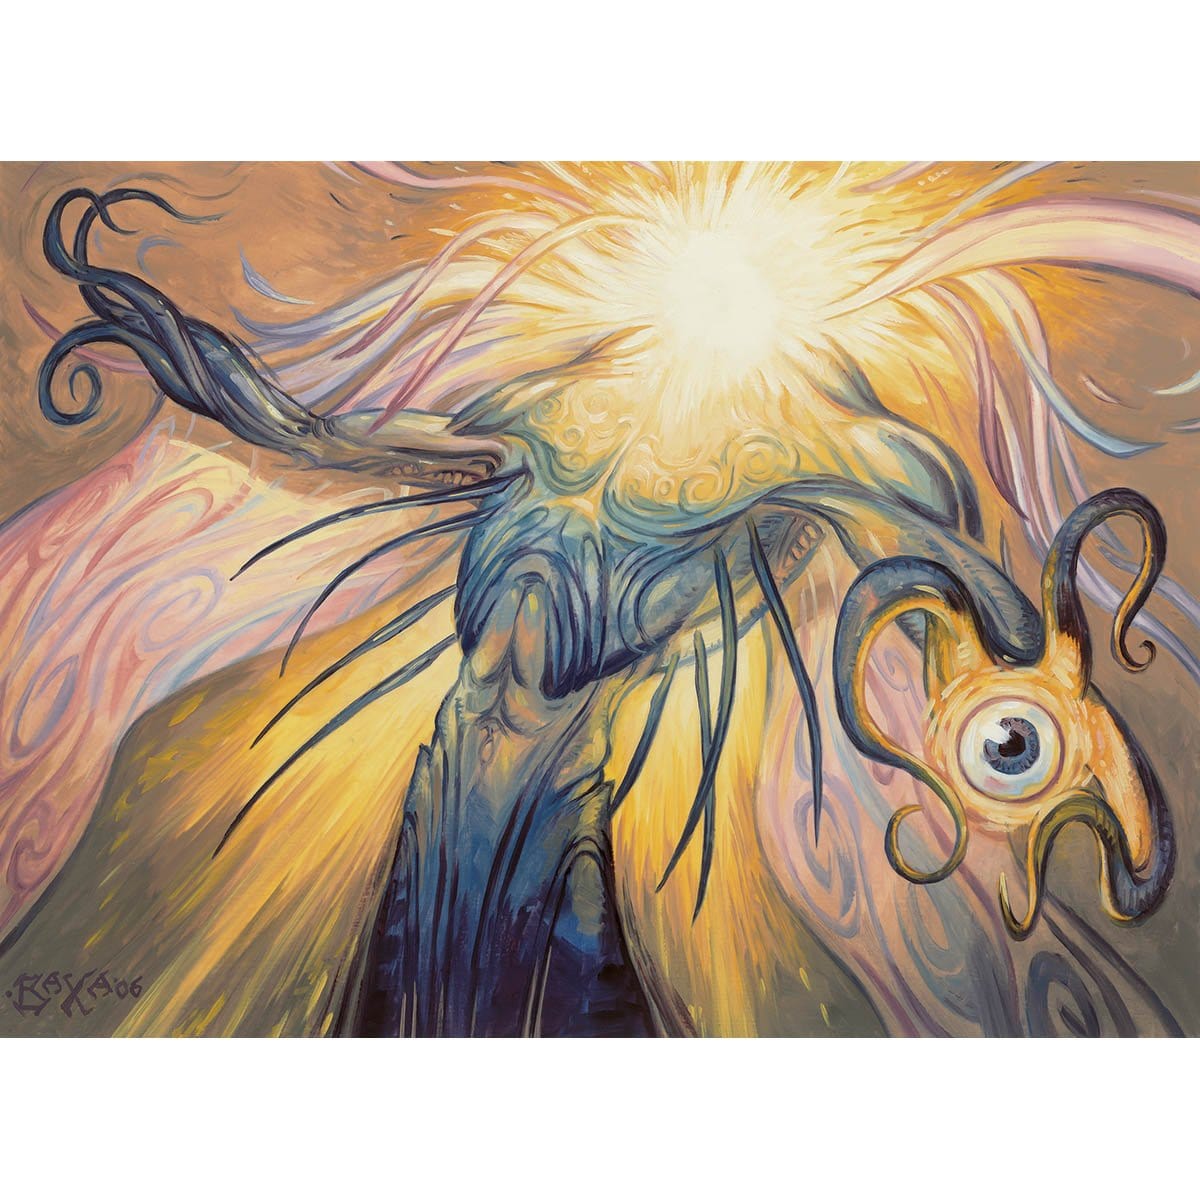 Aether Figment Print - Print - Original Magic Art - Accessories for Magic the Gathering and other card games